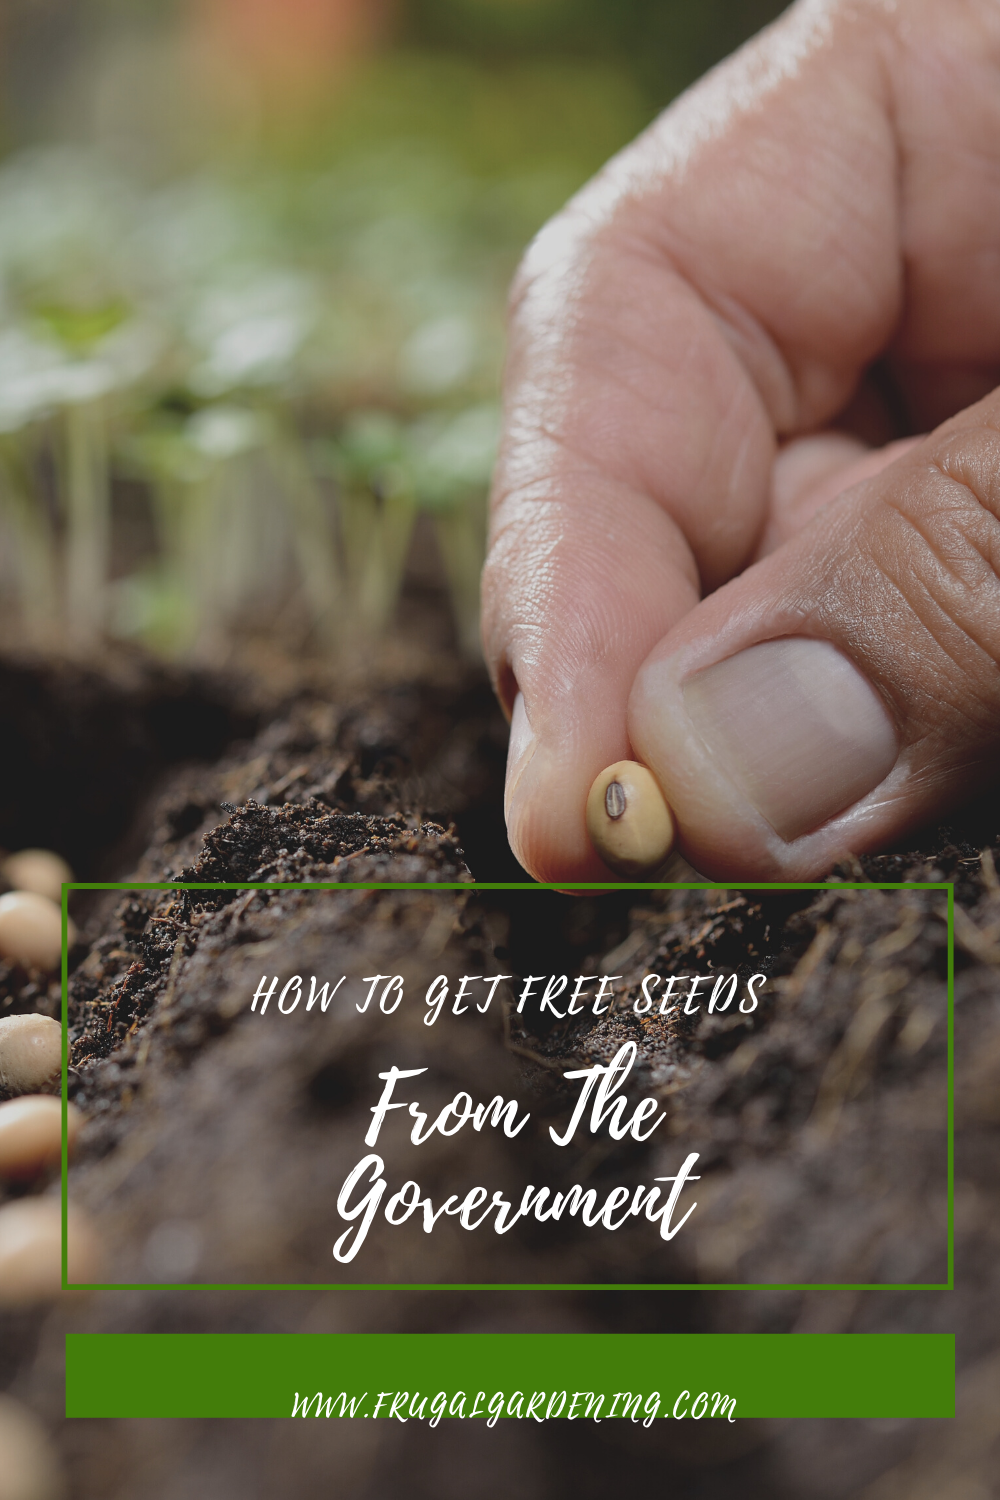 How To Get Free Seeds From The Government